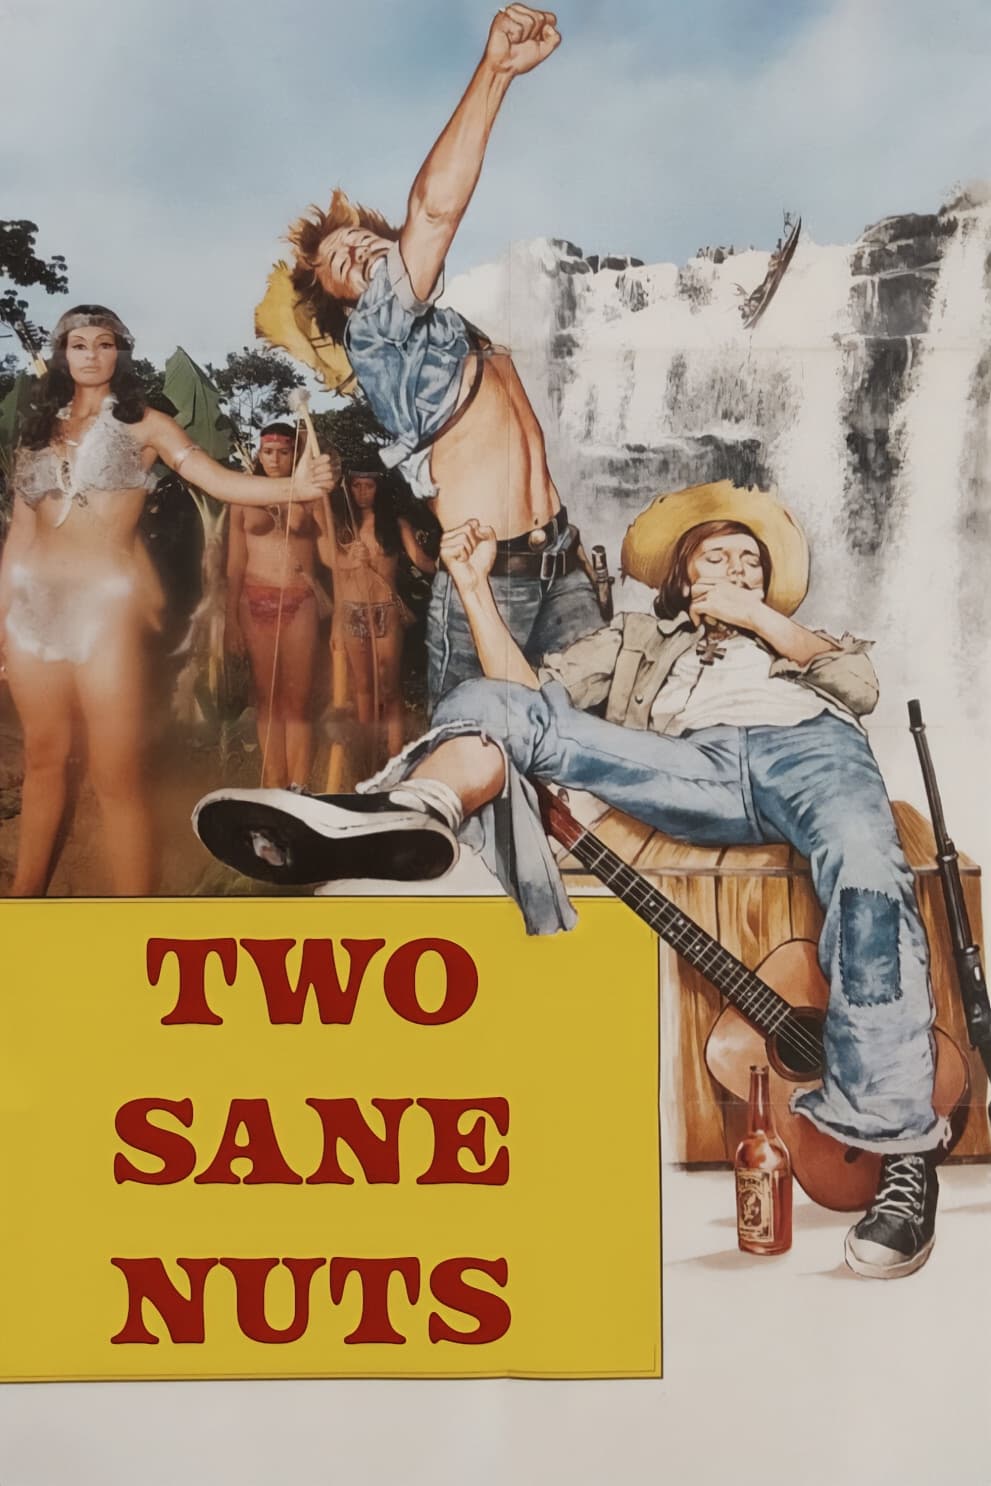 Two Sane Nuts (1974)